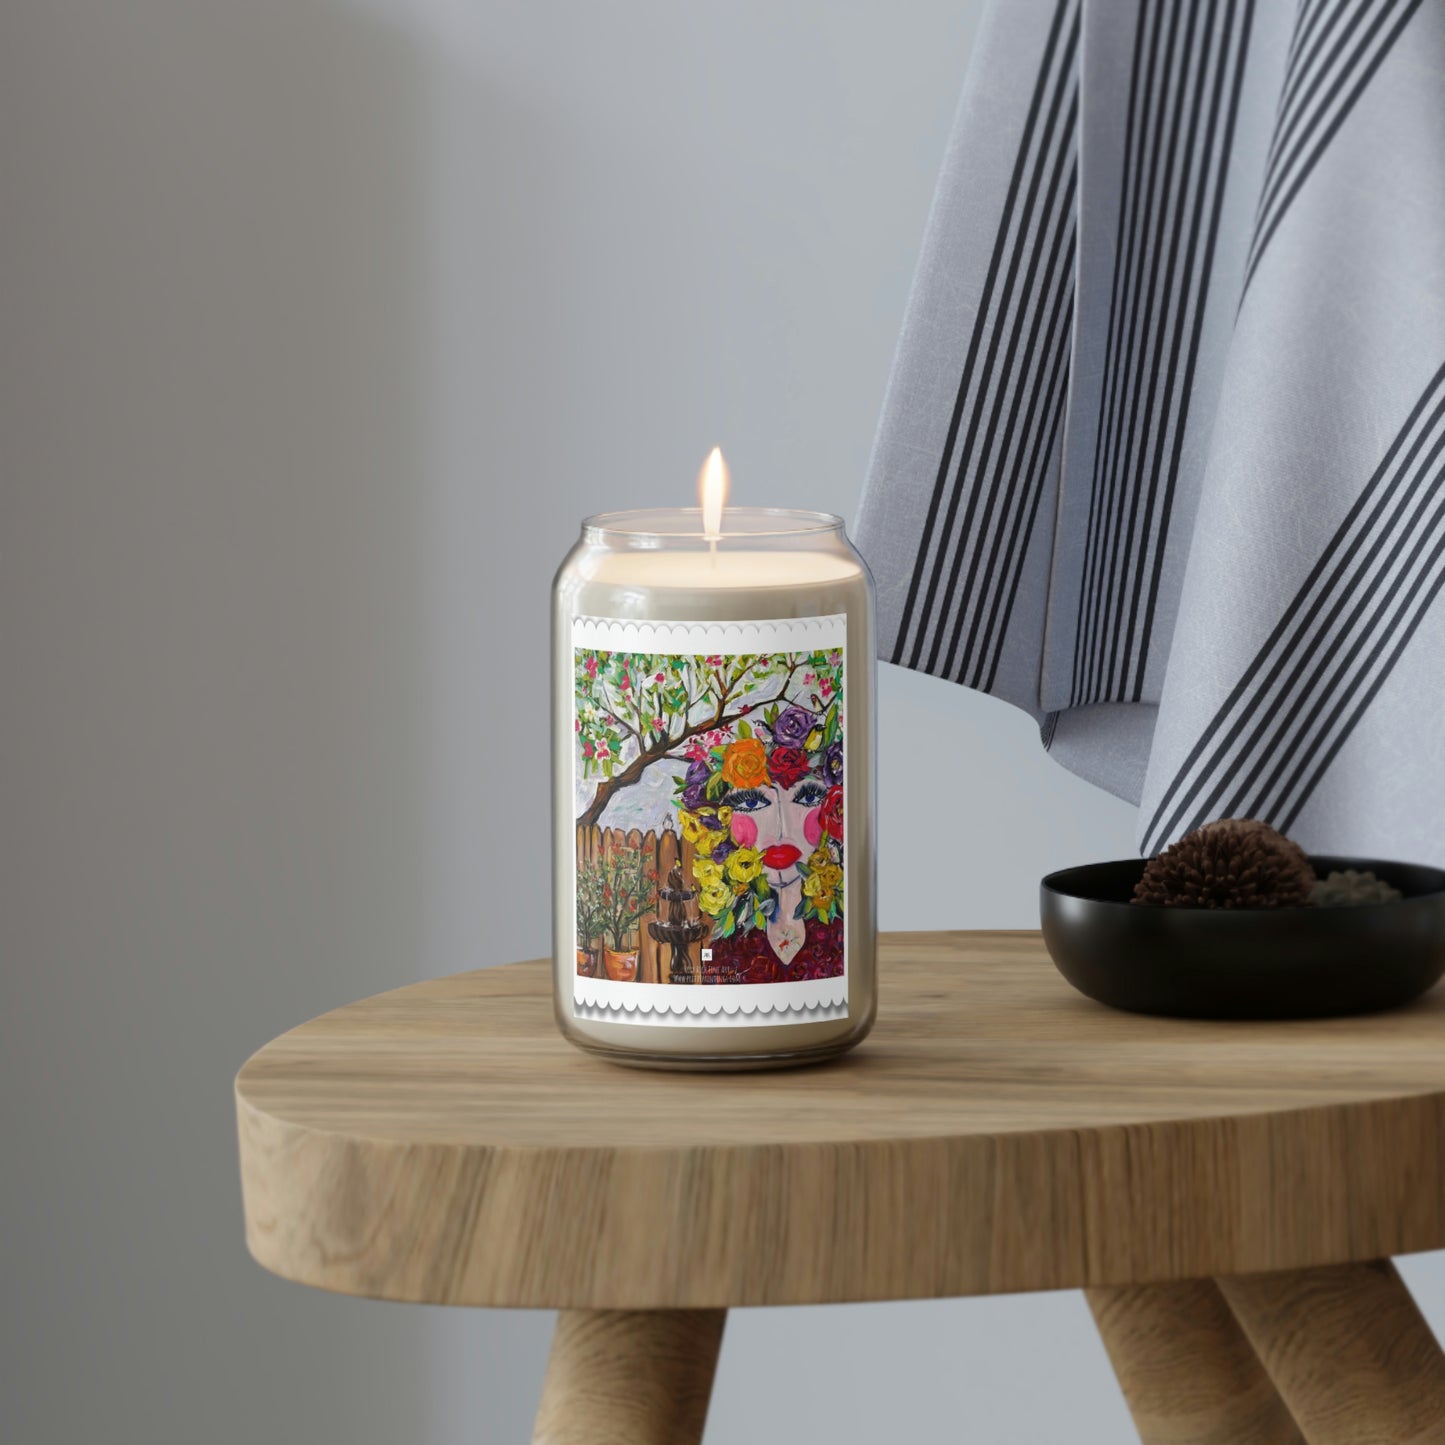 Birds and Blossoms Scented Candle, 13.75oz